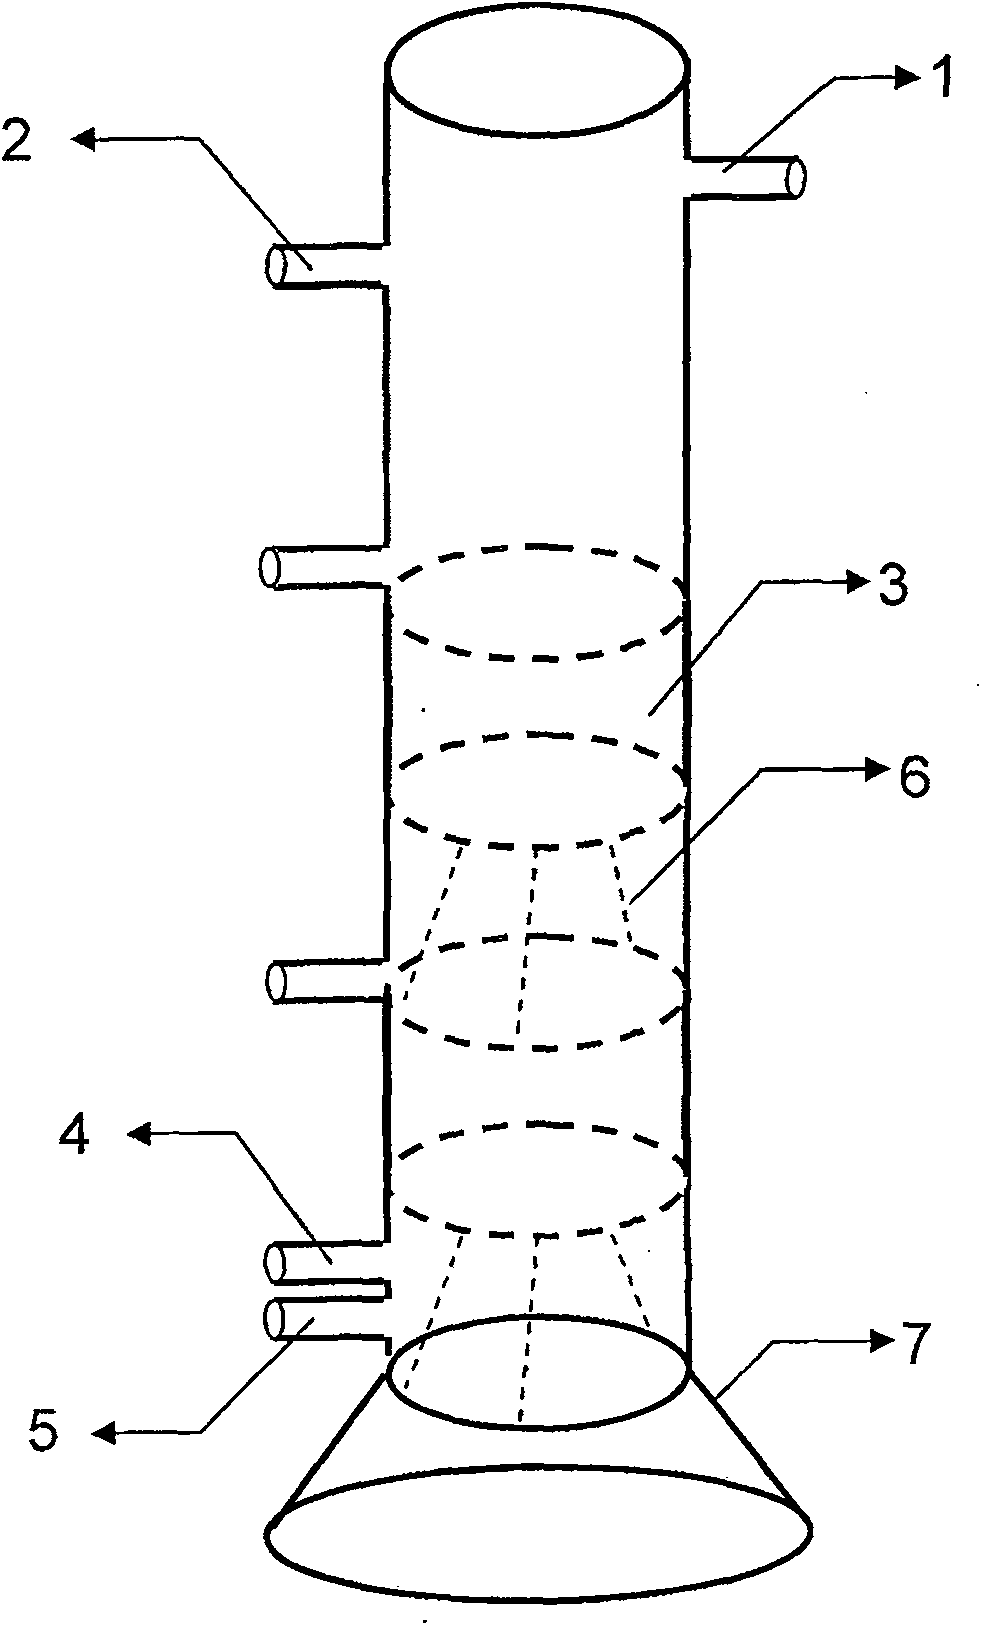 Multifunctional sewage treatment experimental device and uses thereof